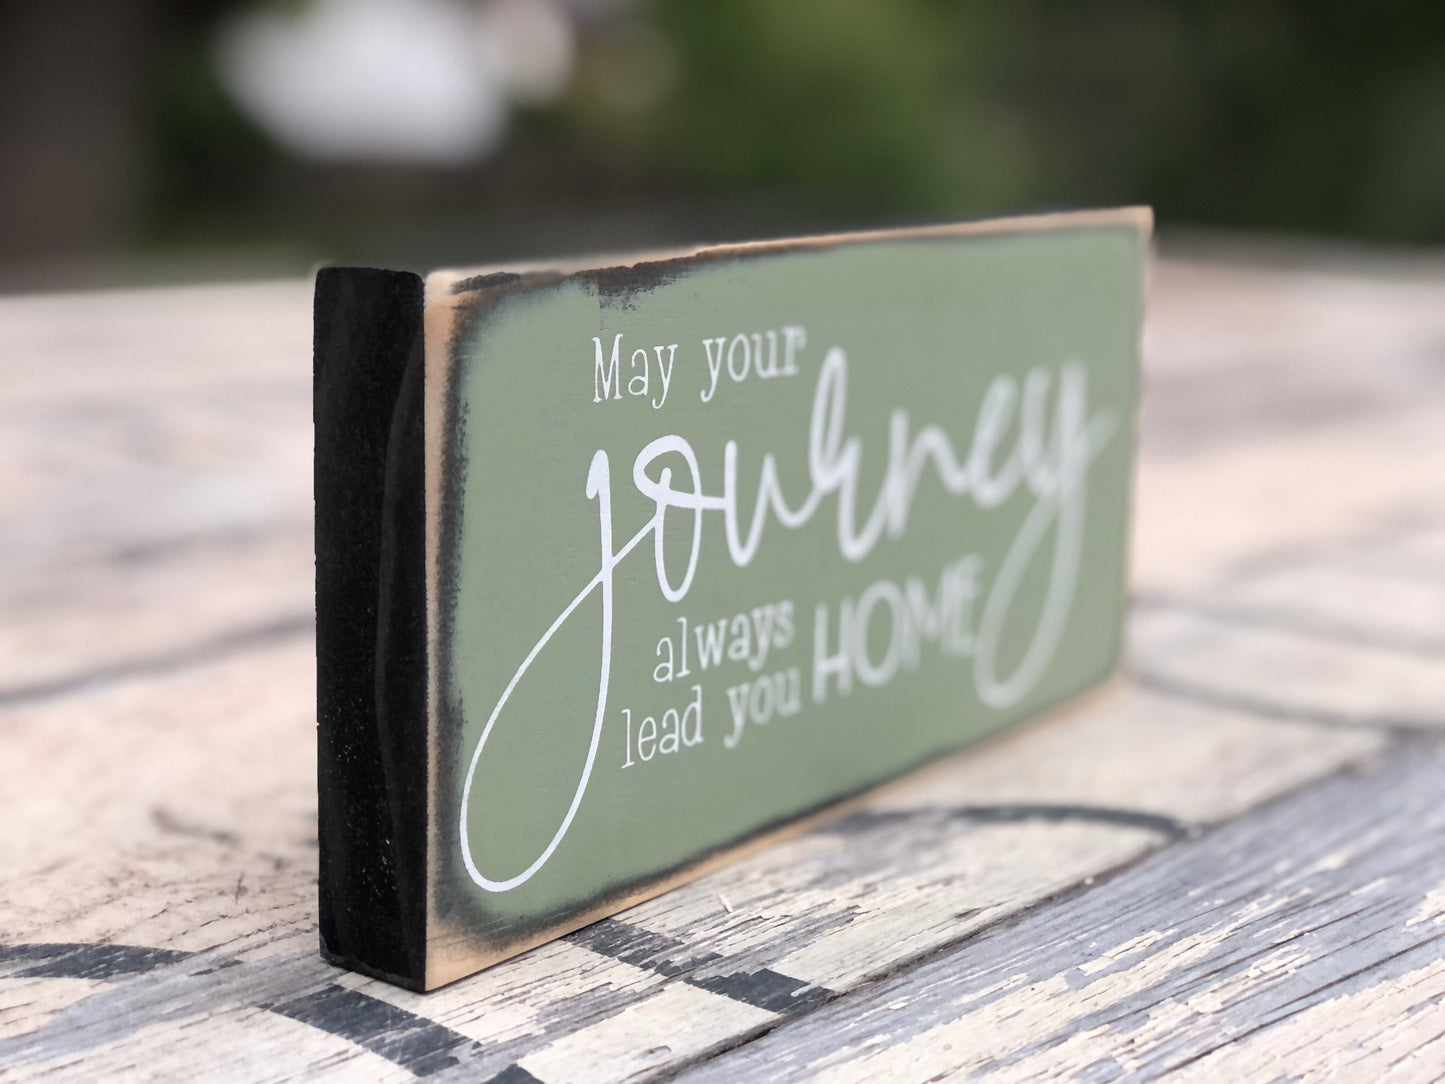 MAY YOUR JOURNEY ALWAYS LEAD YOU HOME - WOOD SIGN